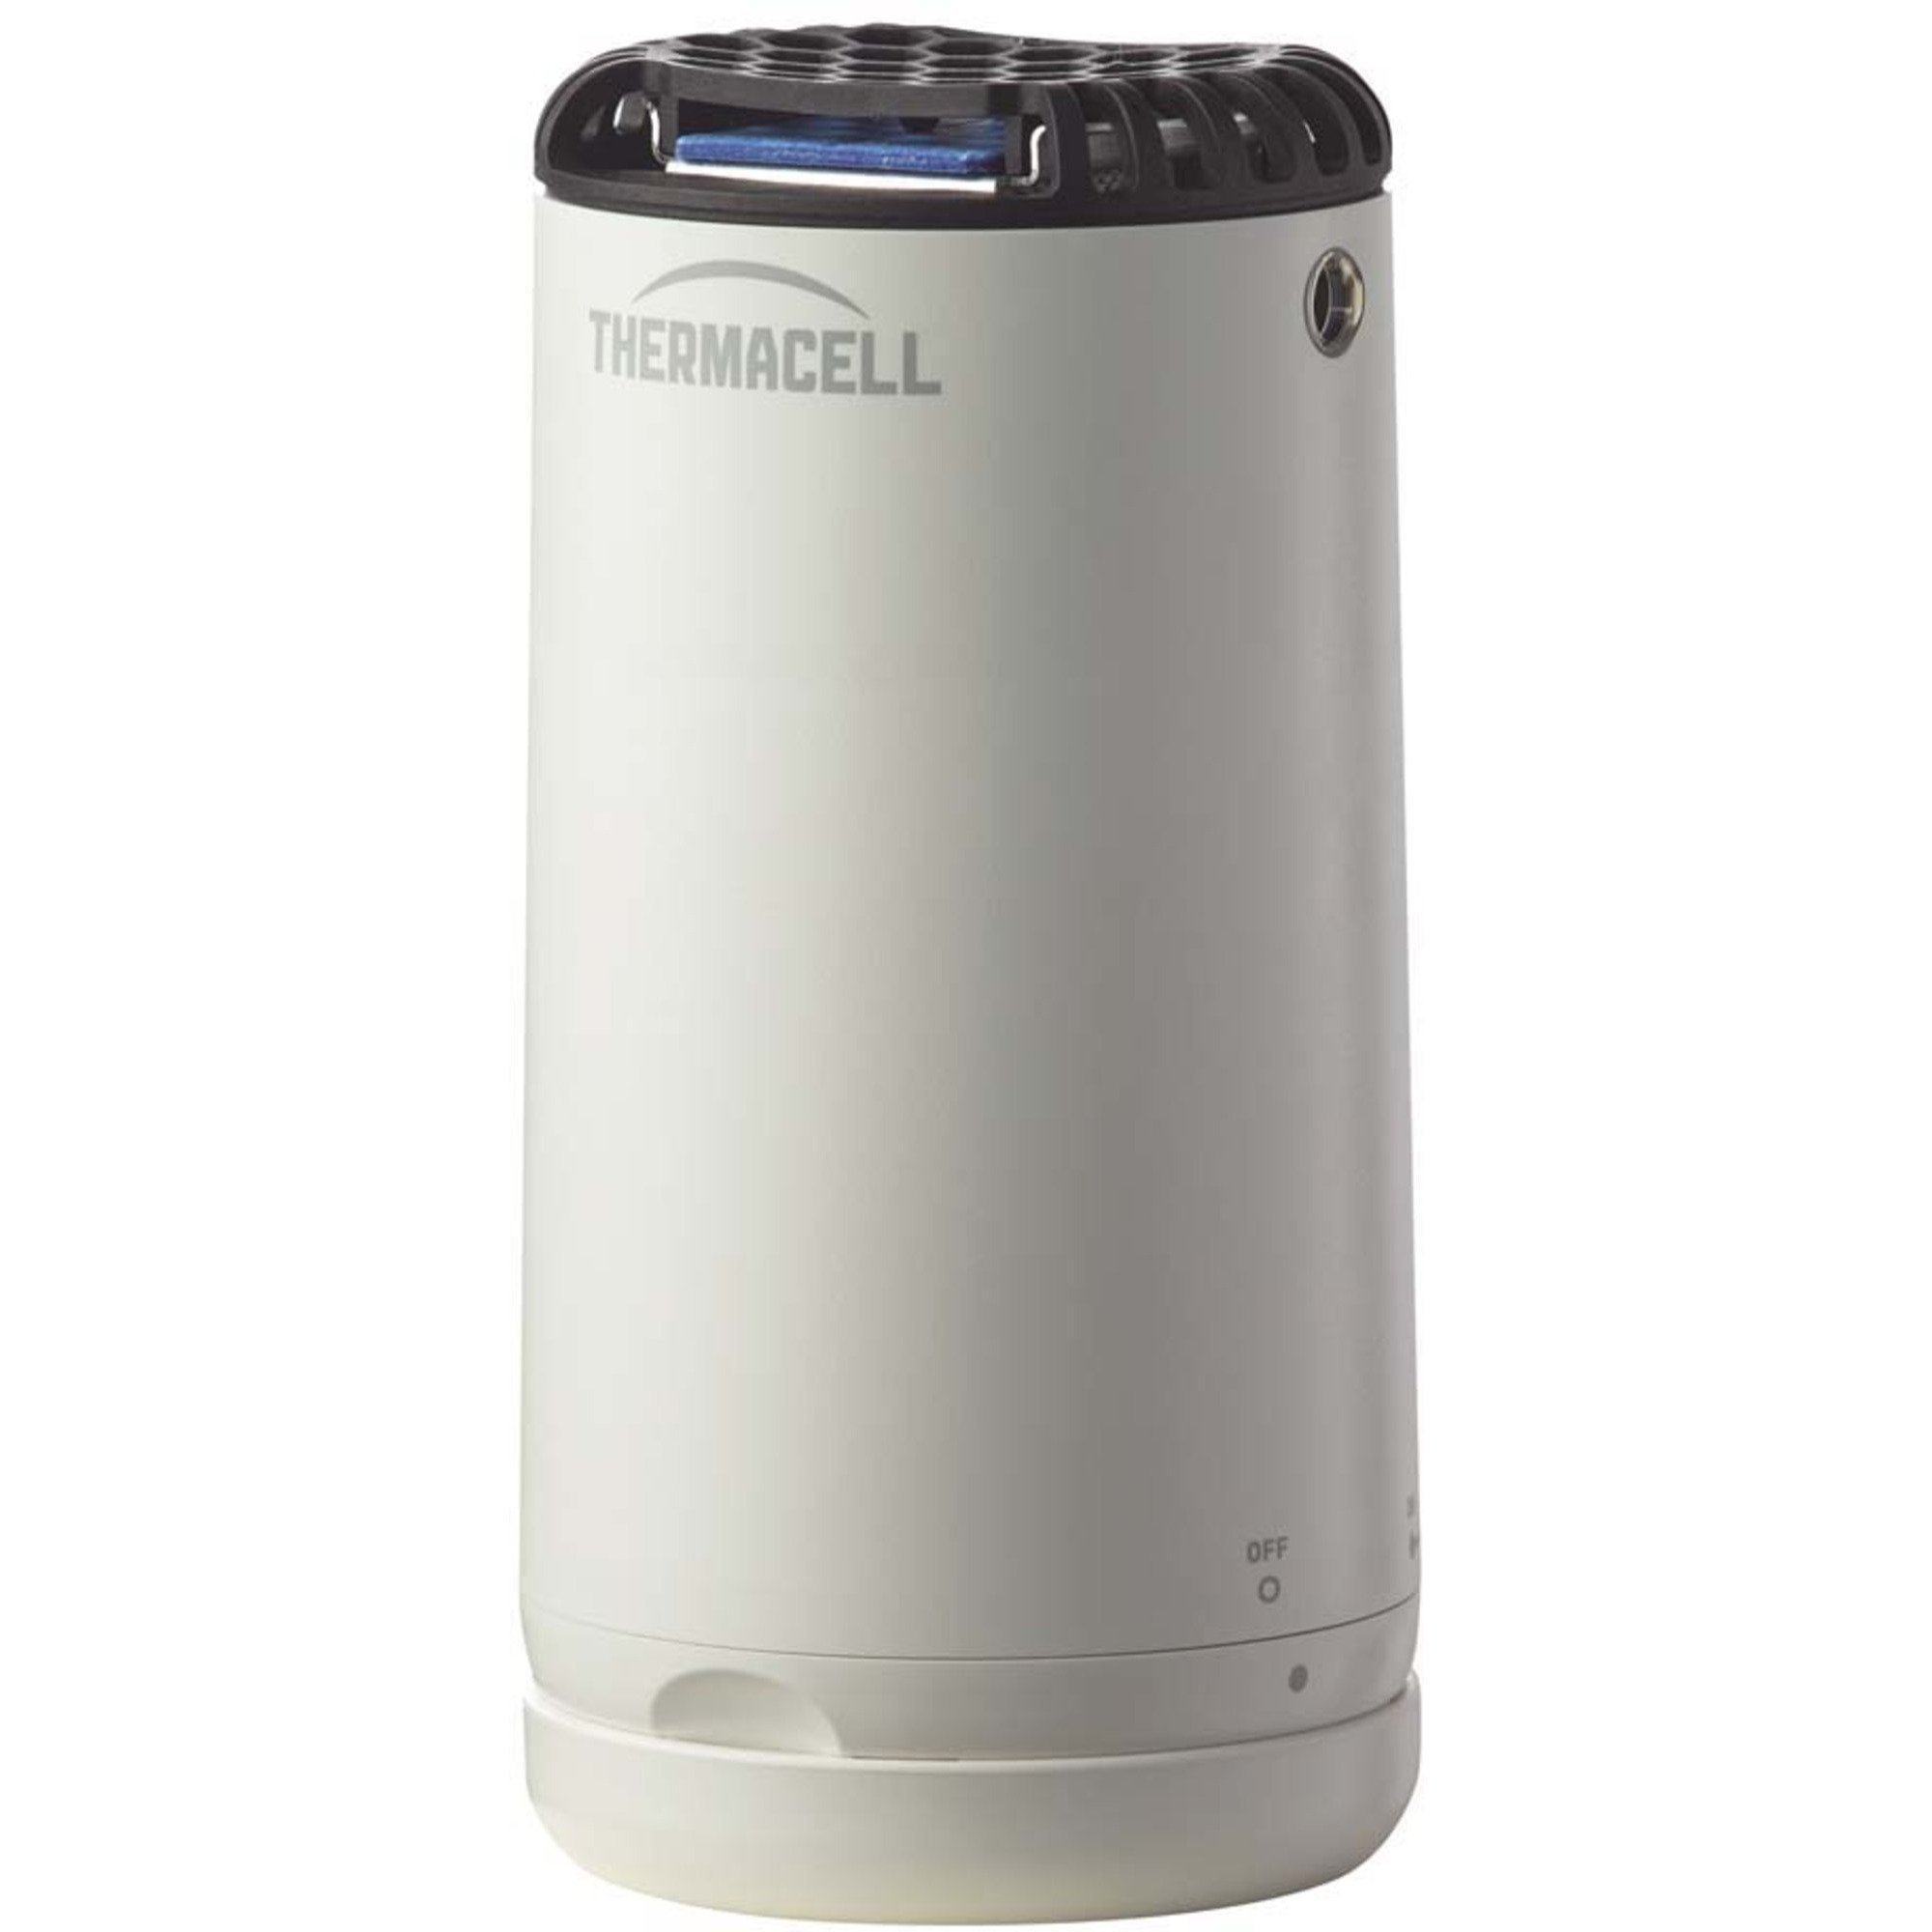 Thermacell Myggskydd Halo Mini Vit